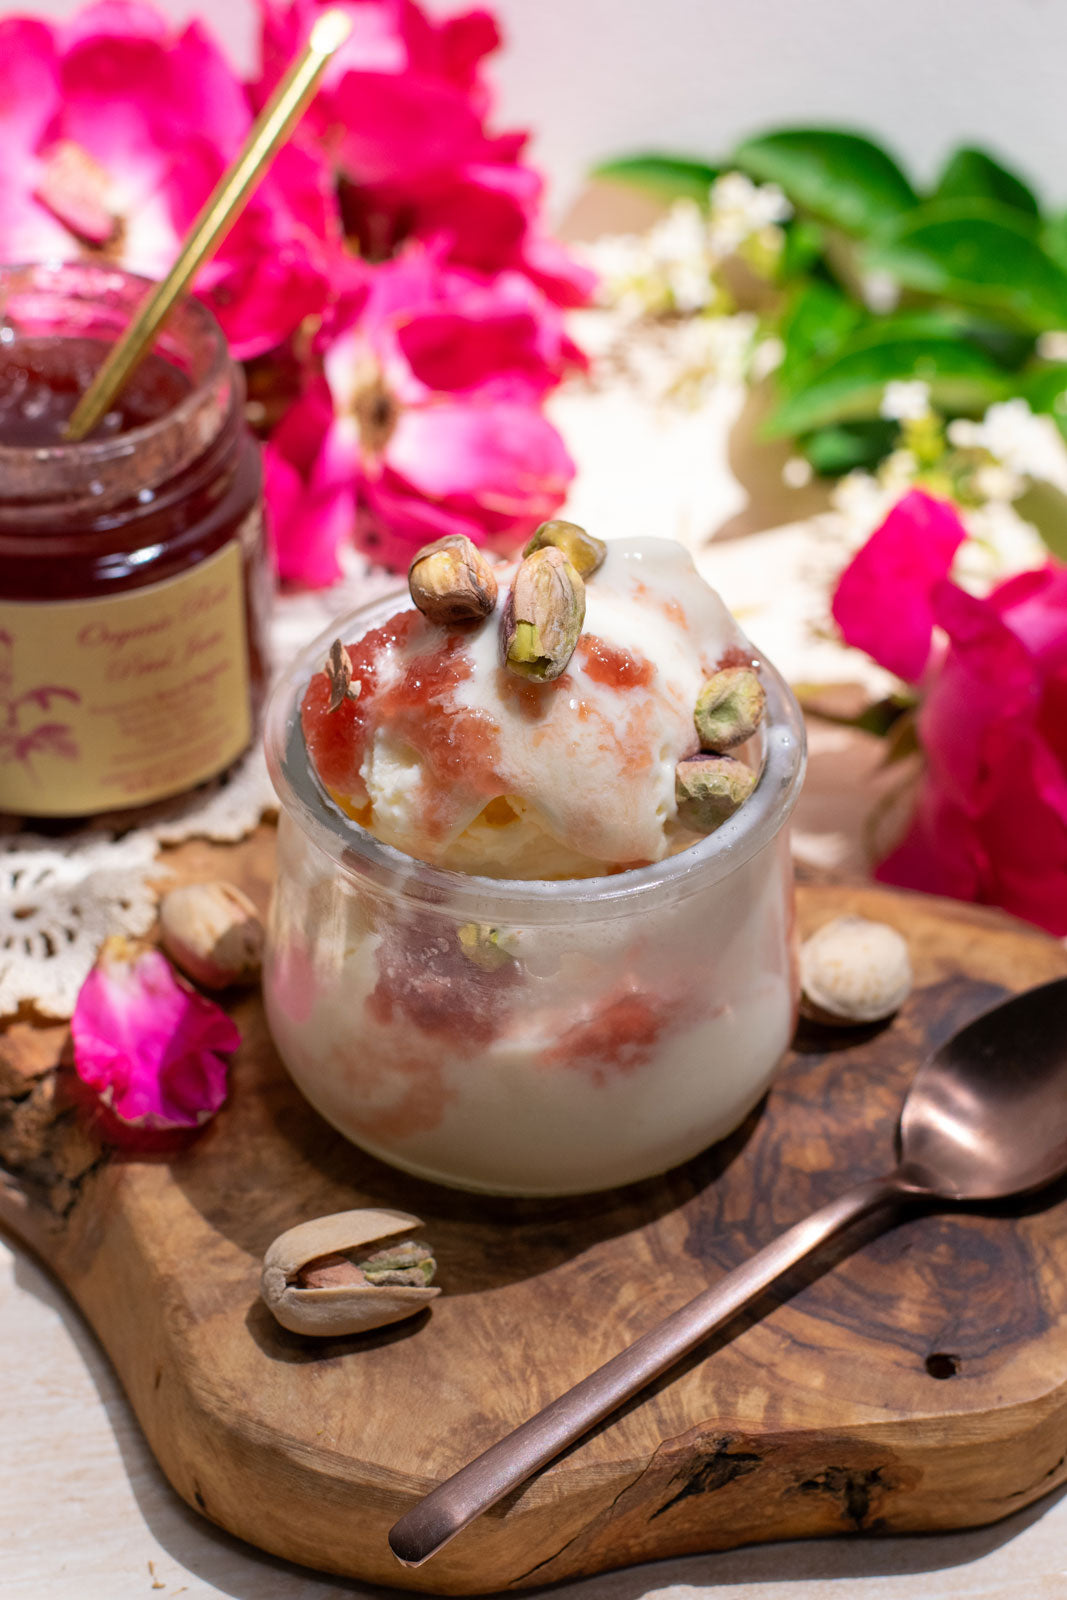 Decadent bowl of ice cream topped with organic rose petal jam, a jar of which is displayed open in the background.